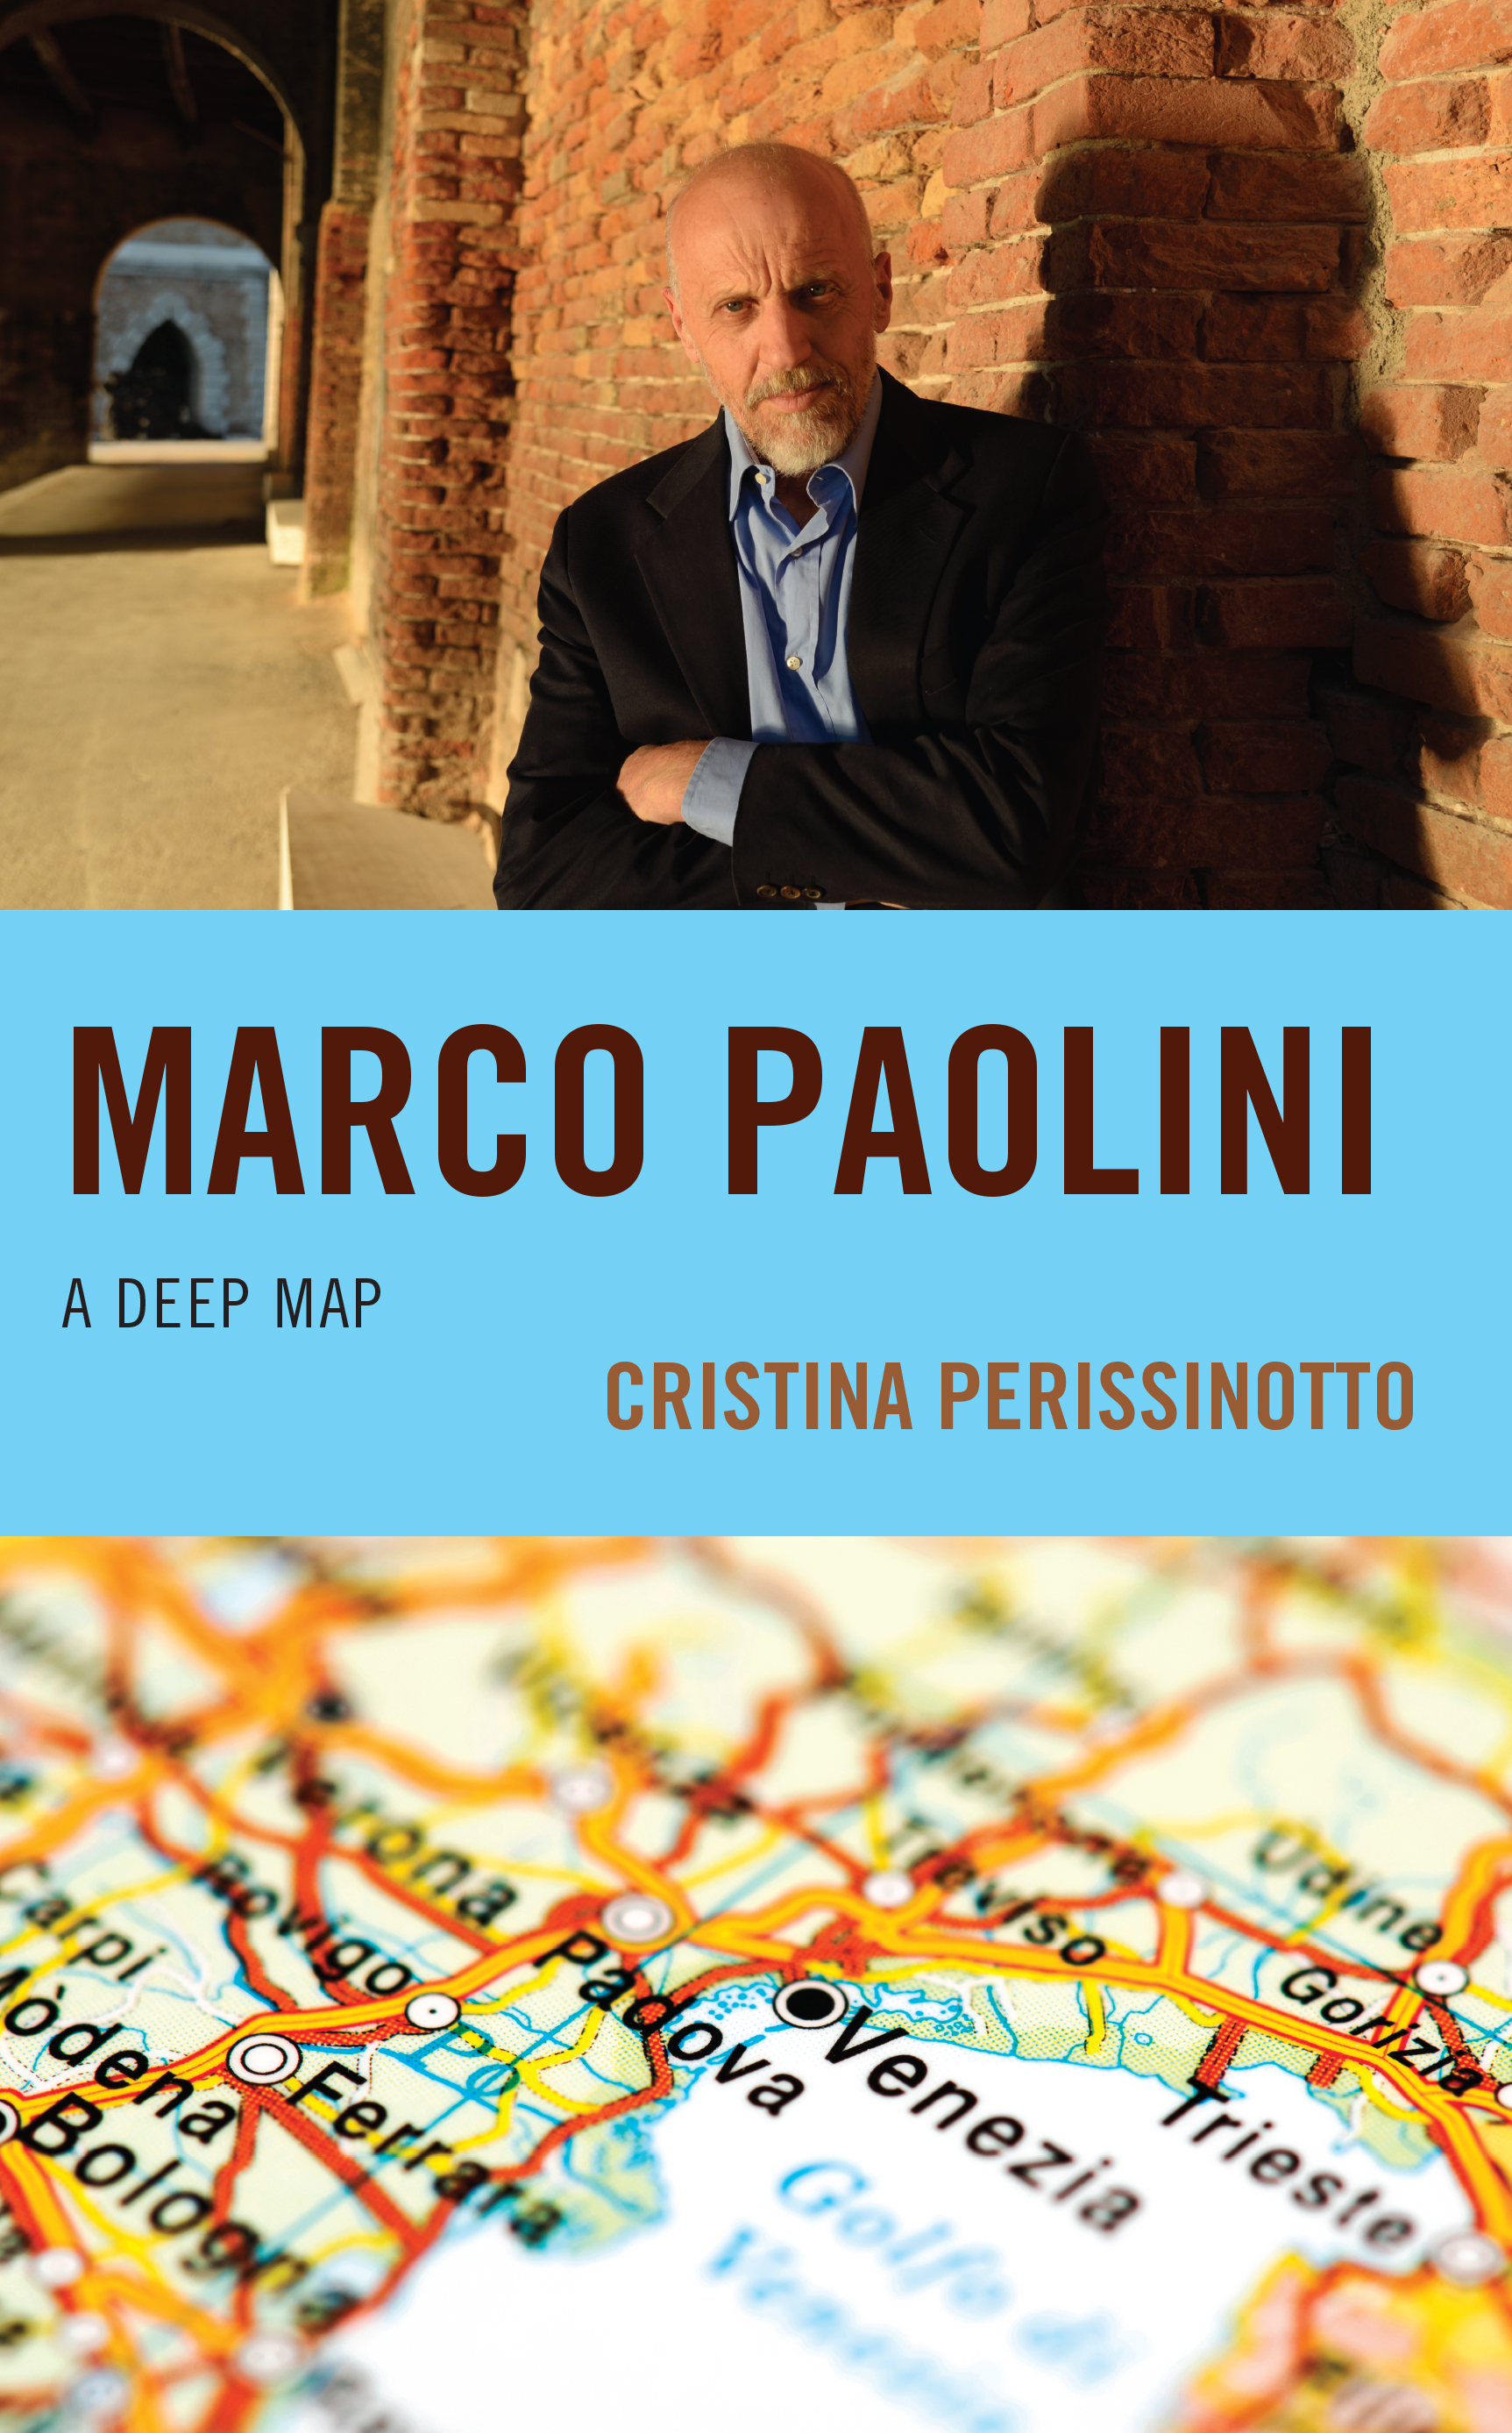 Marco Paolini: A Deep Map